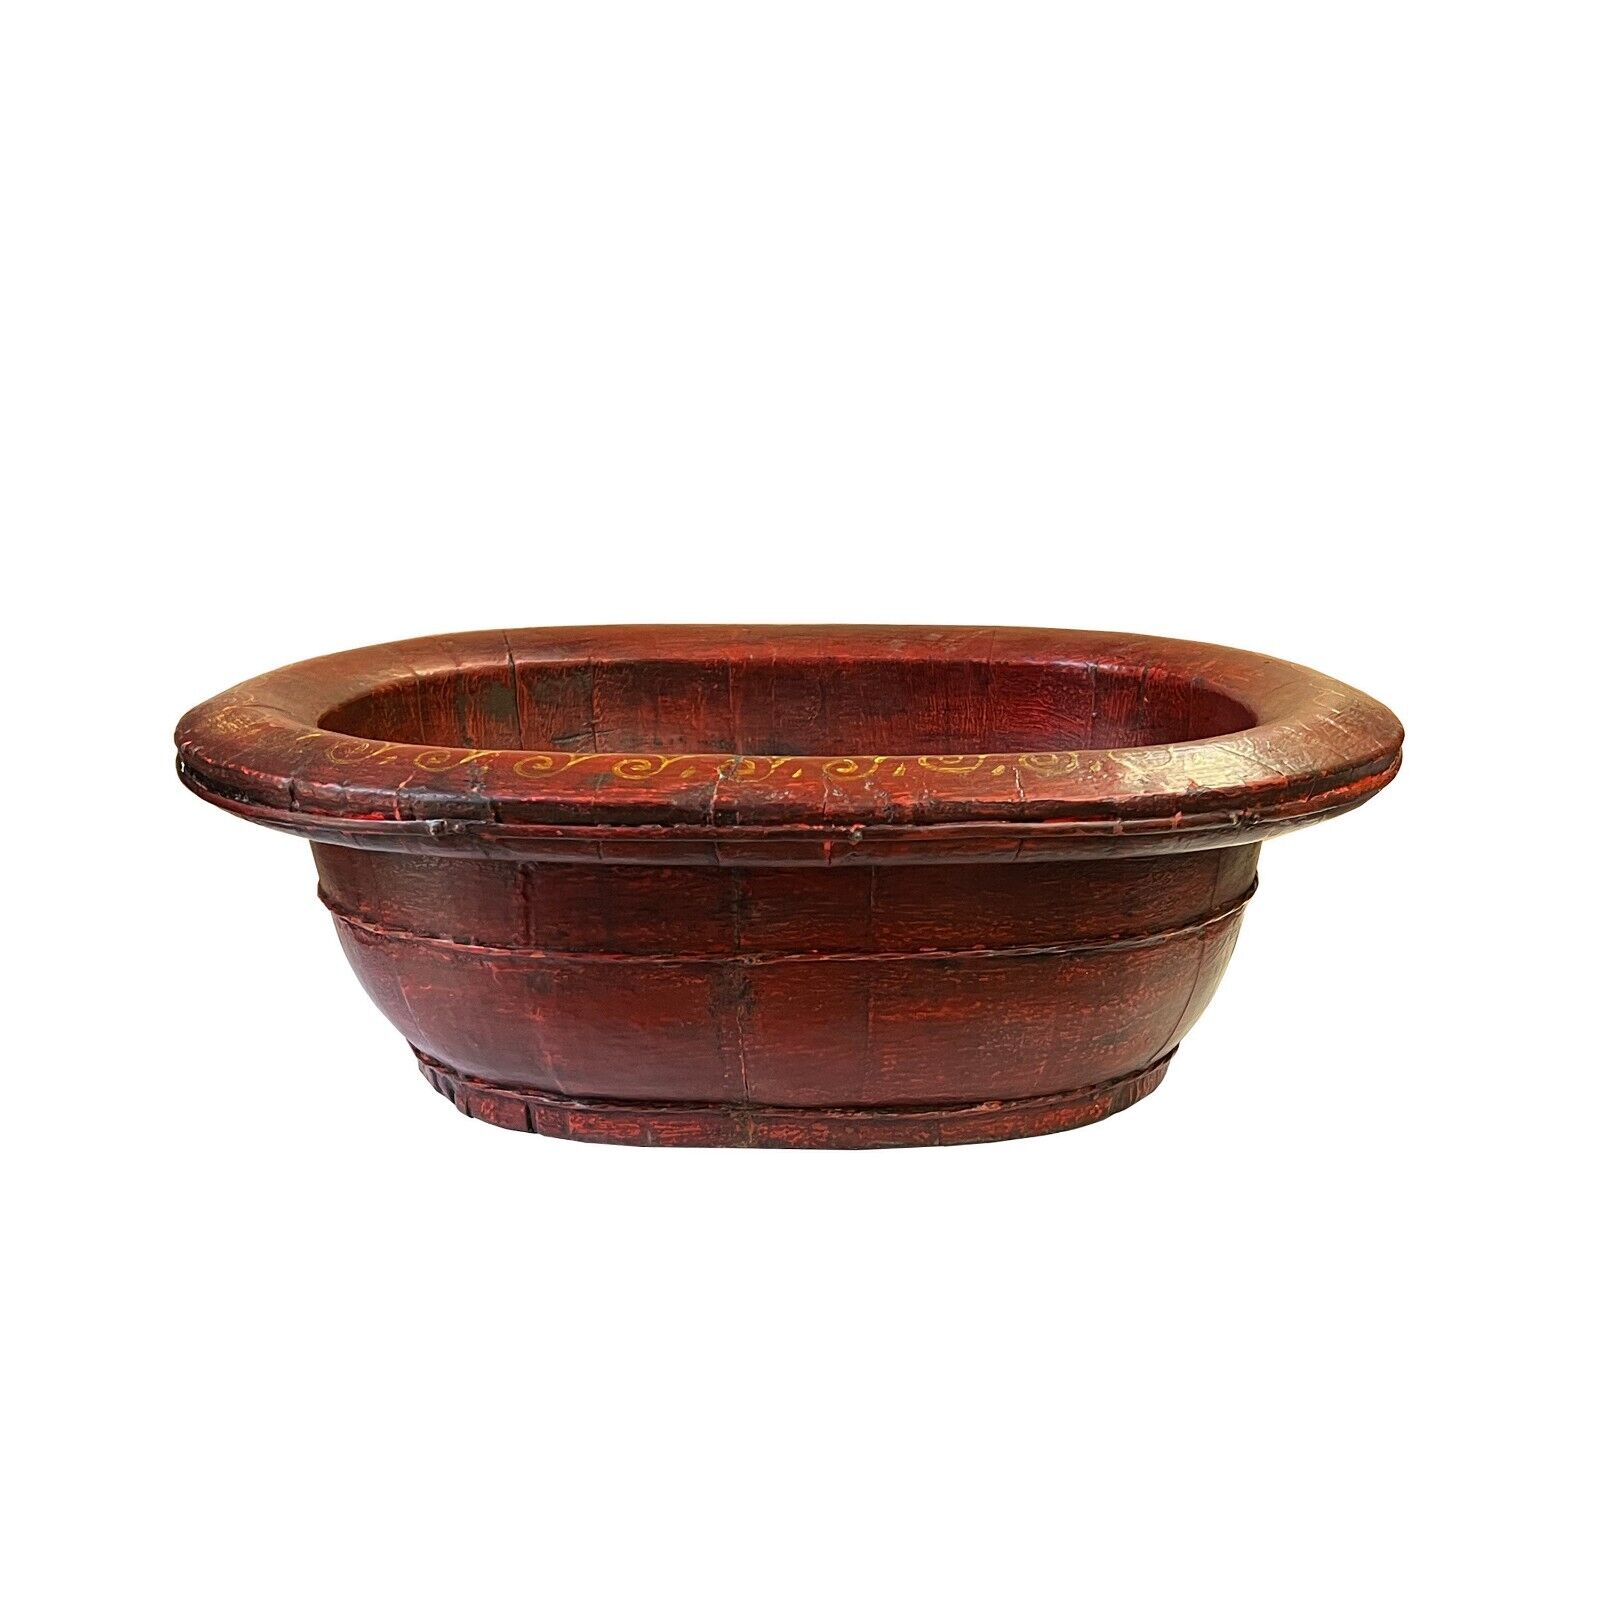 Chinese Vintage Distressed Brick Red Flower Oval Shape Wood Bucket ws3118